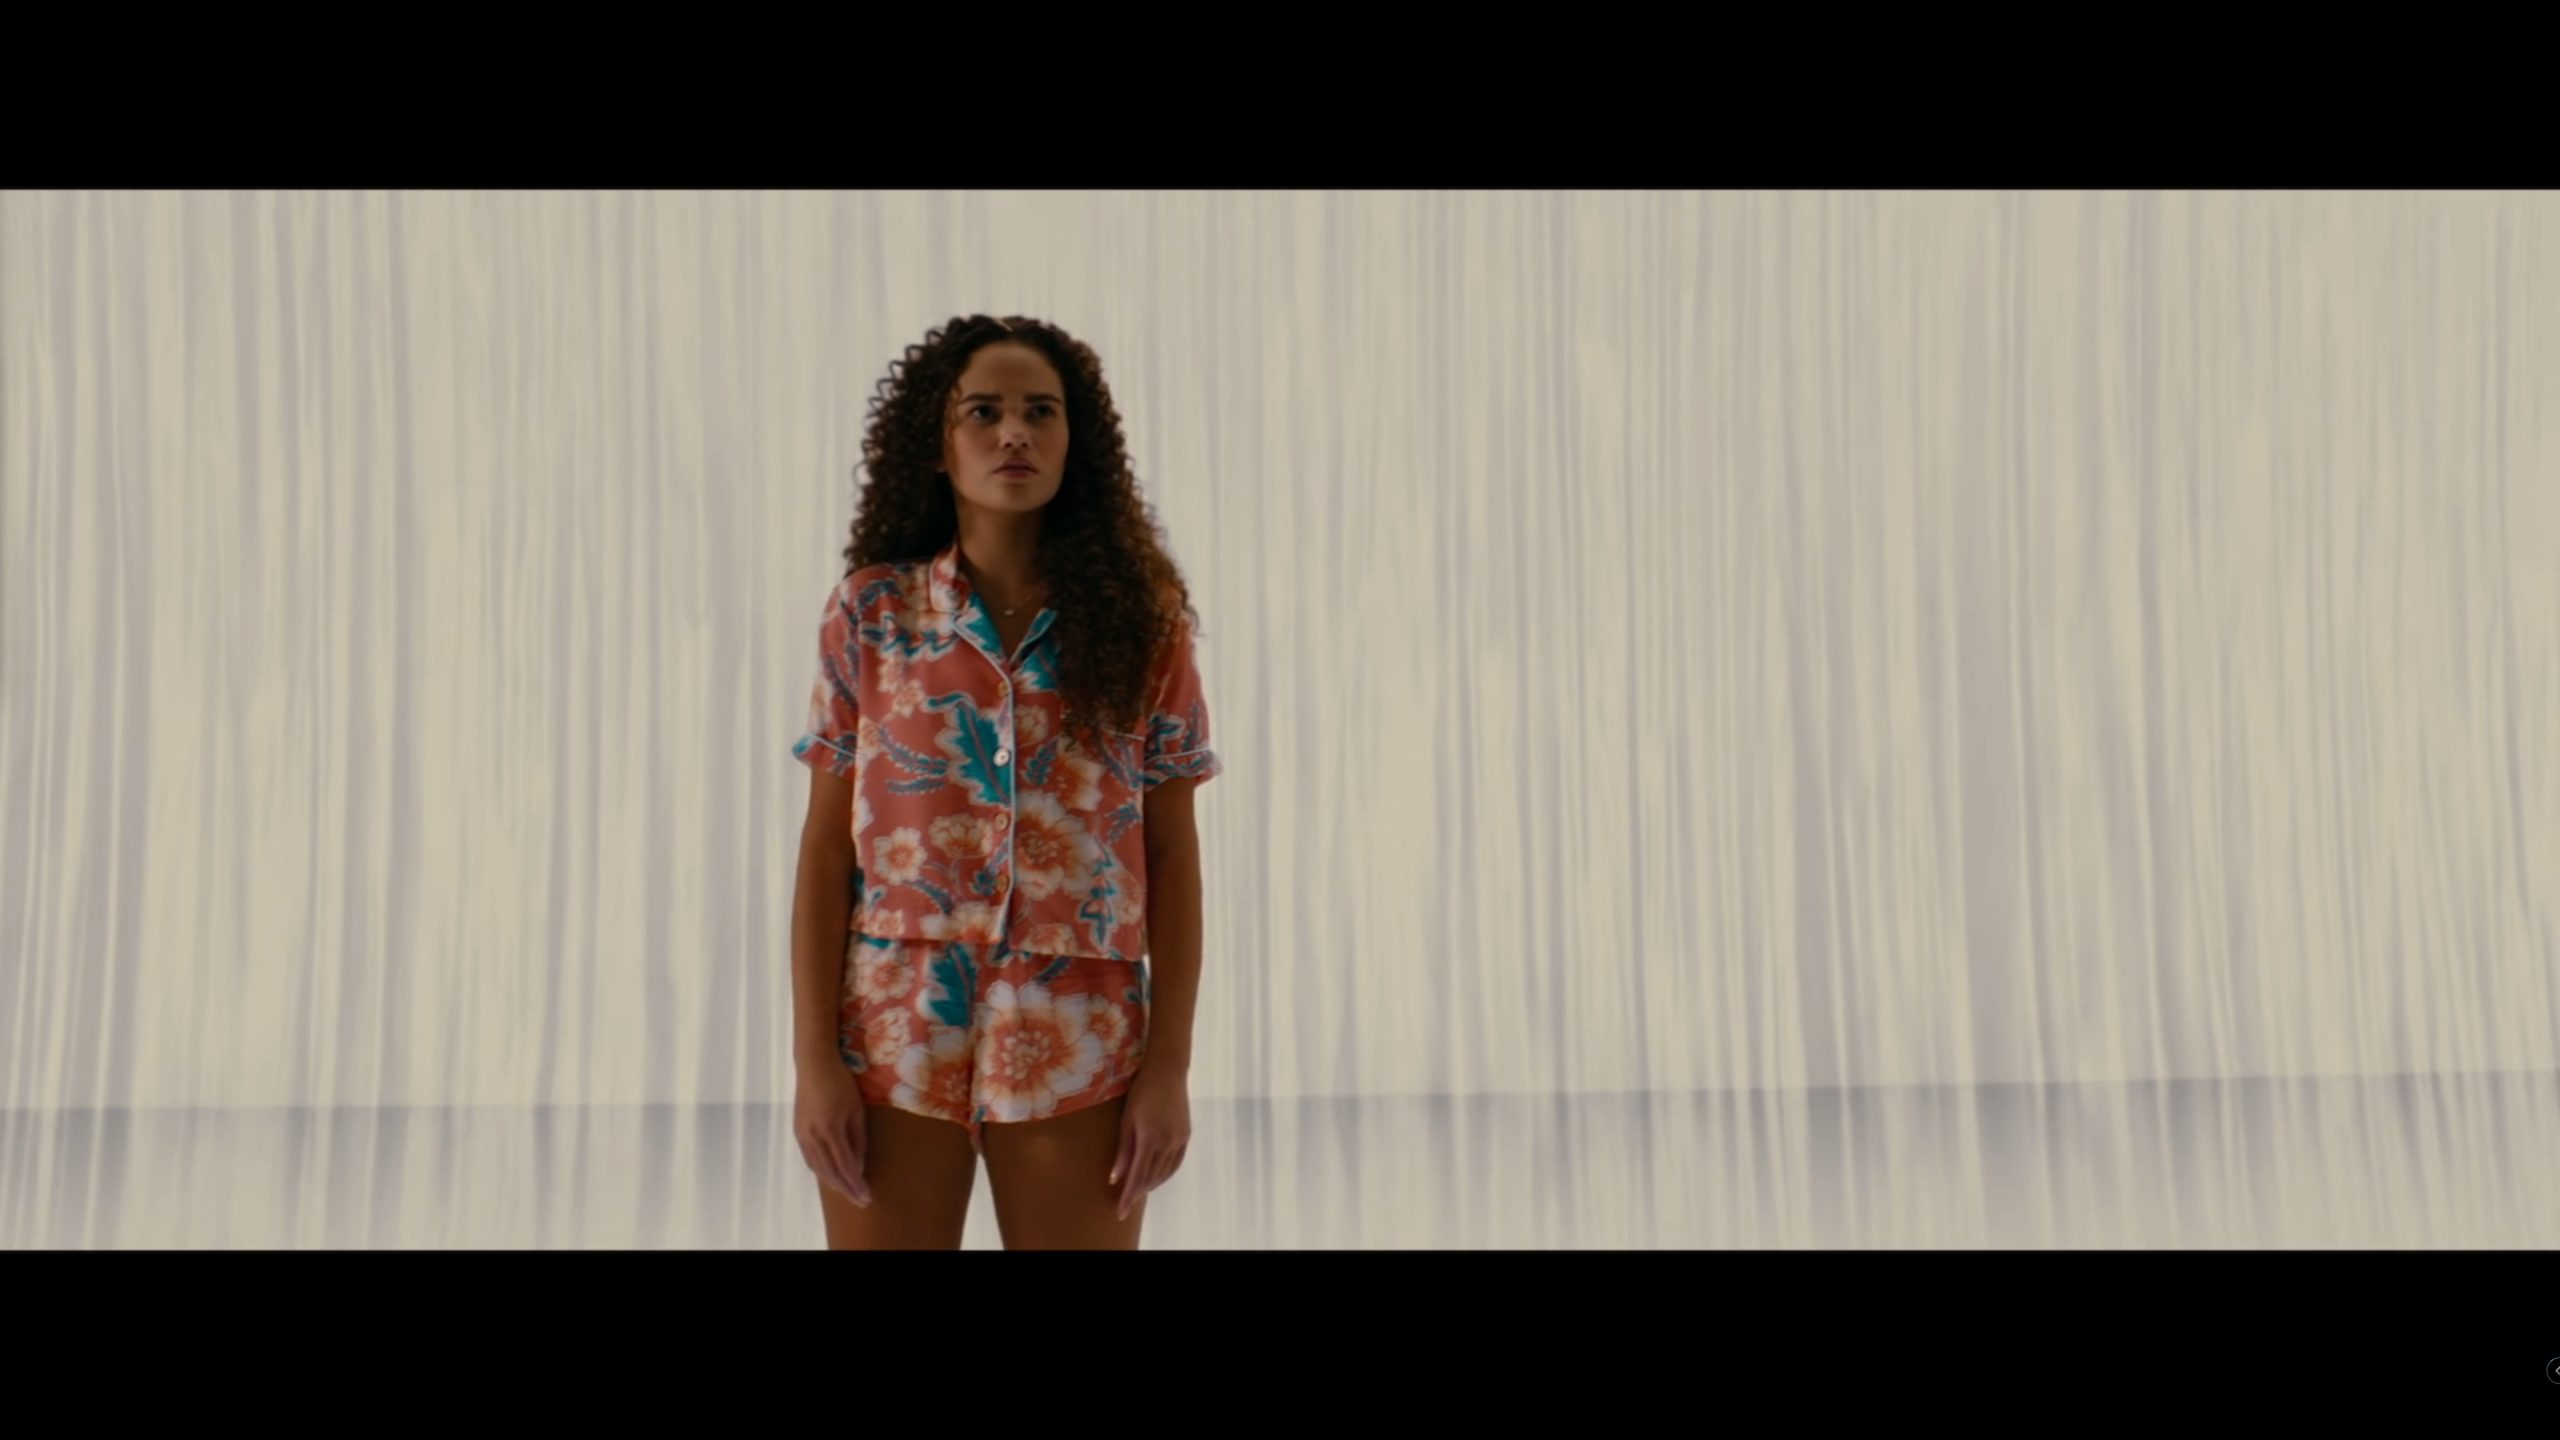 Hannah (Madison Pettis) in or near Margaux's mainframe